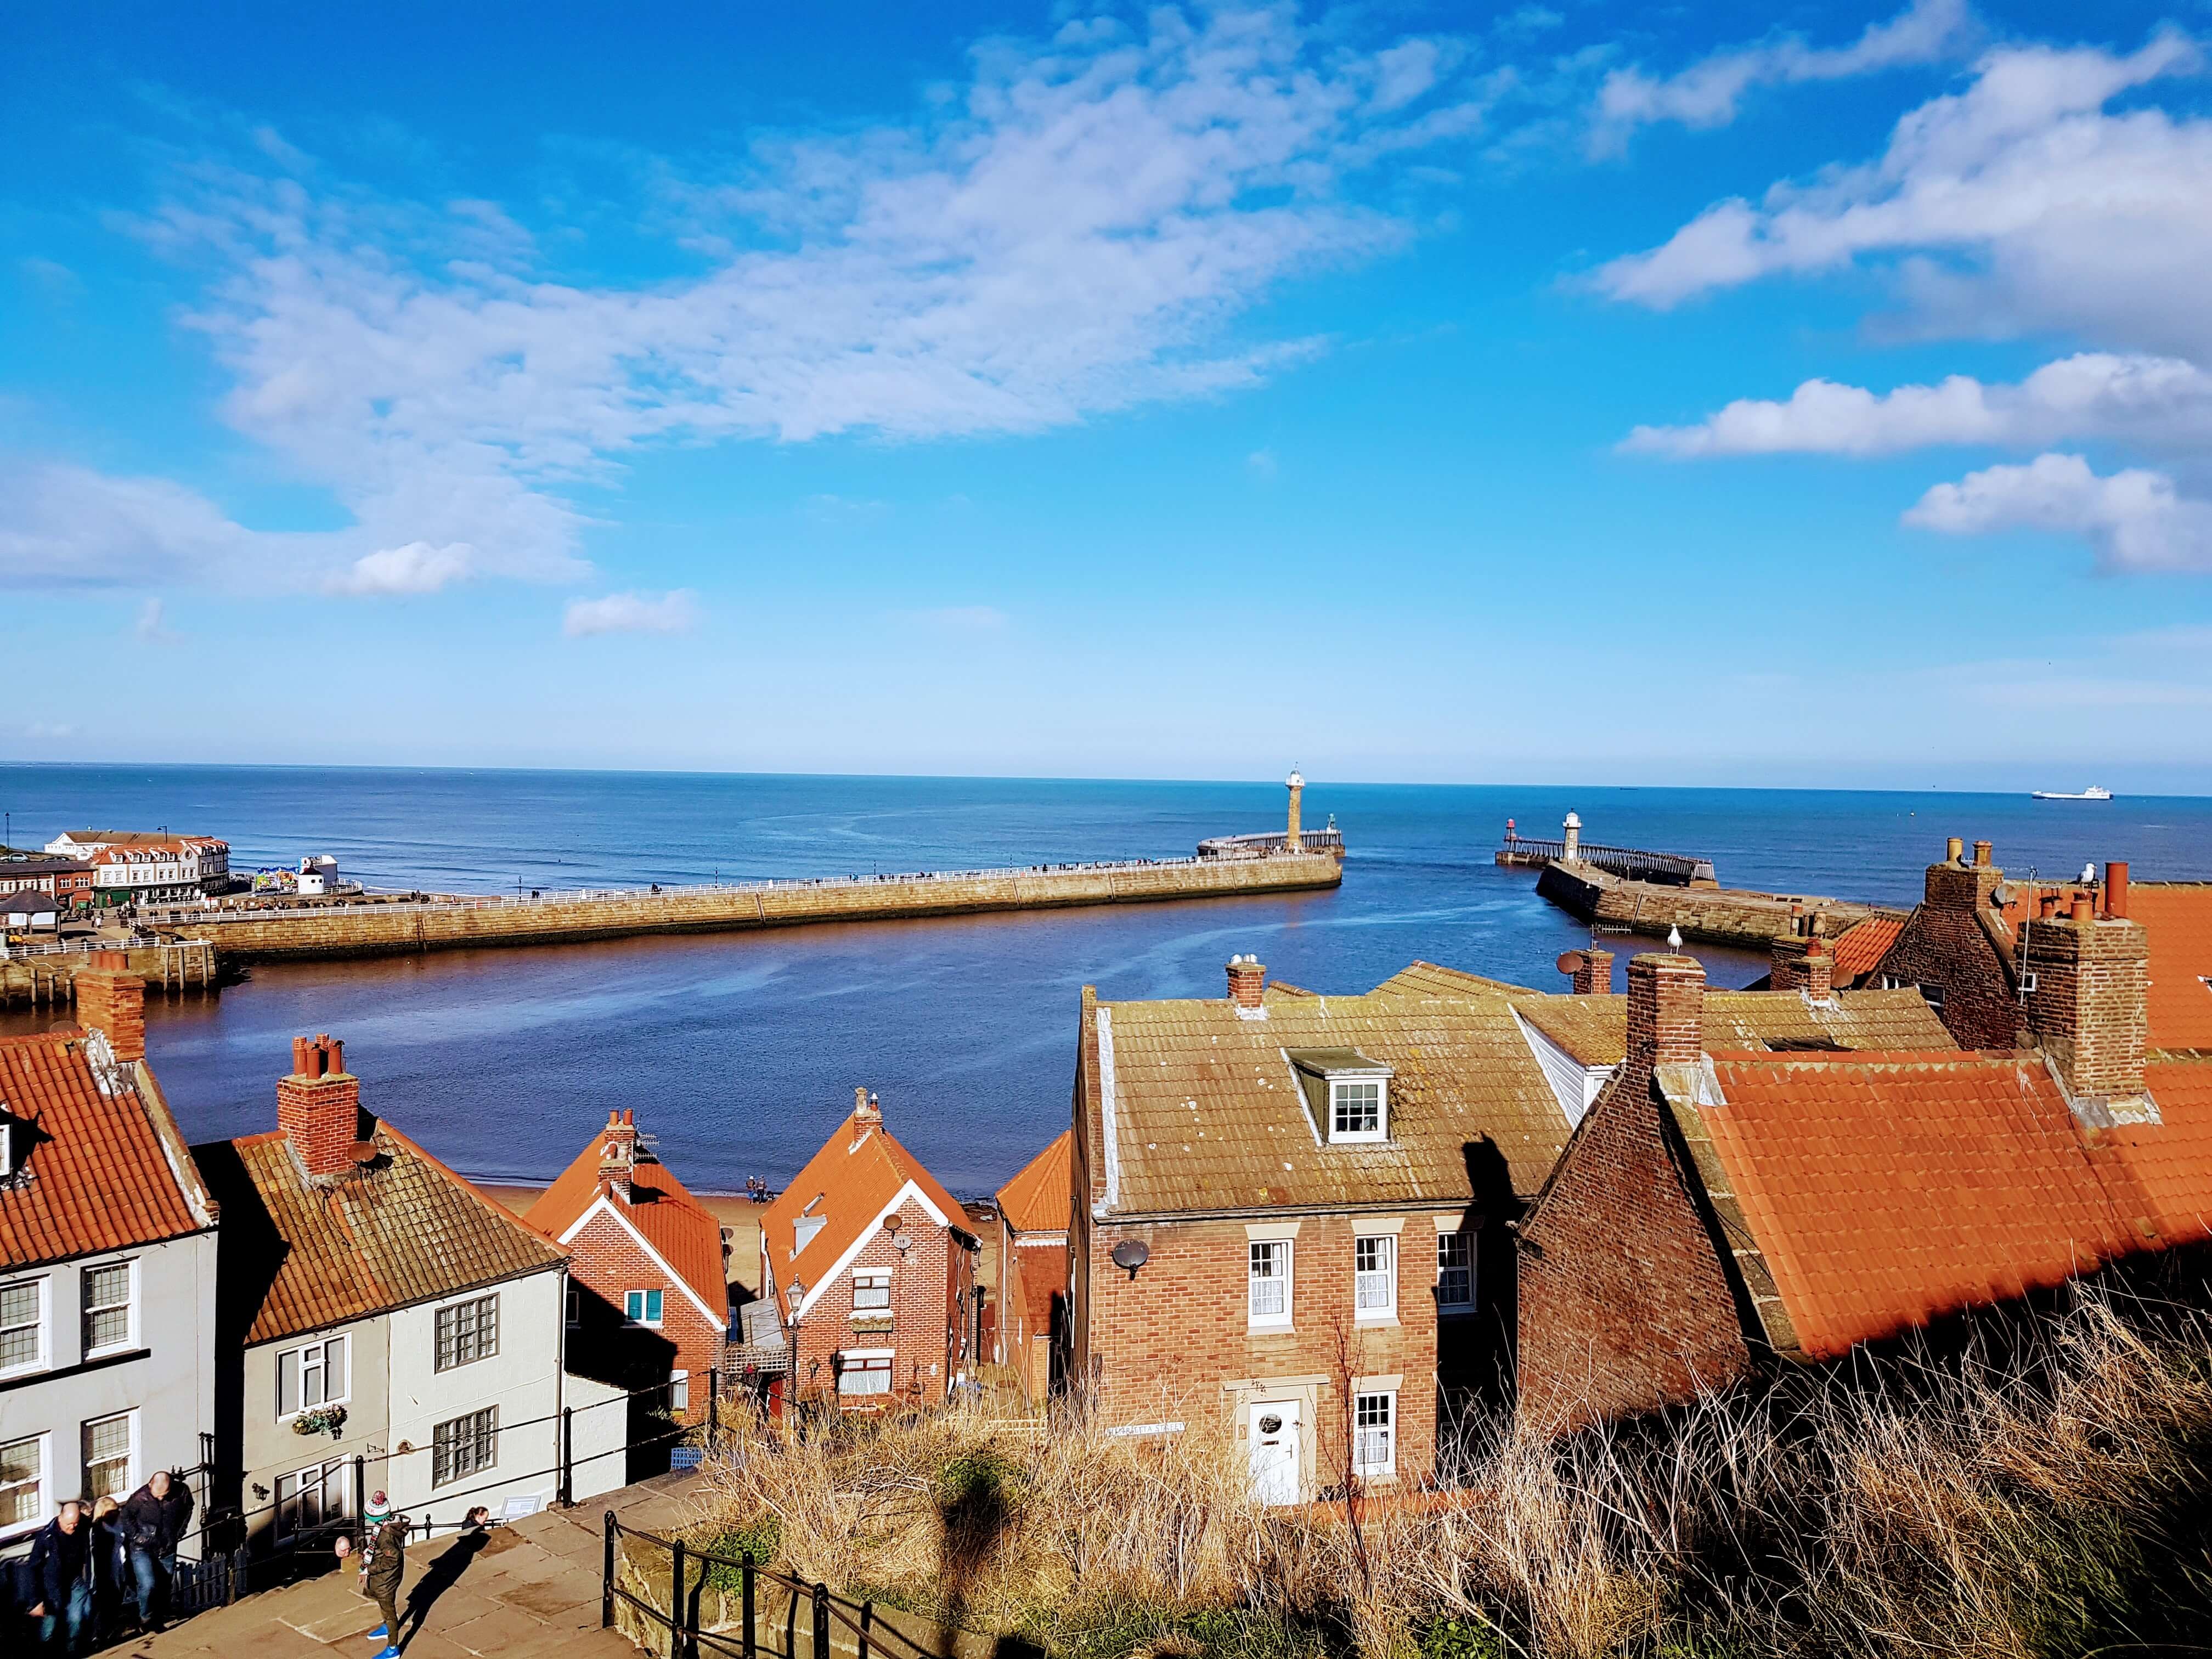 A seaside in Whitby, with houses looking out over a patch of very blue sea.